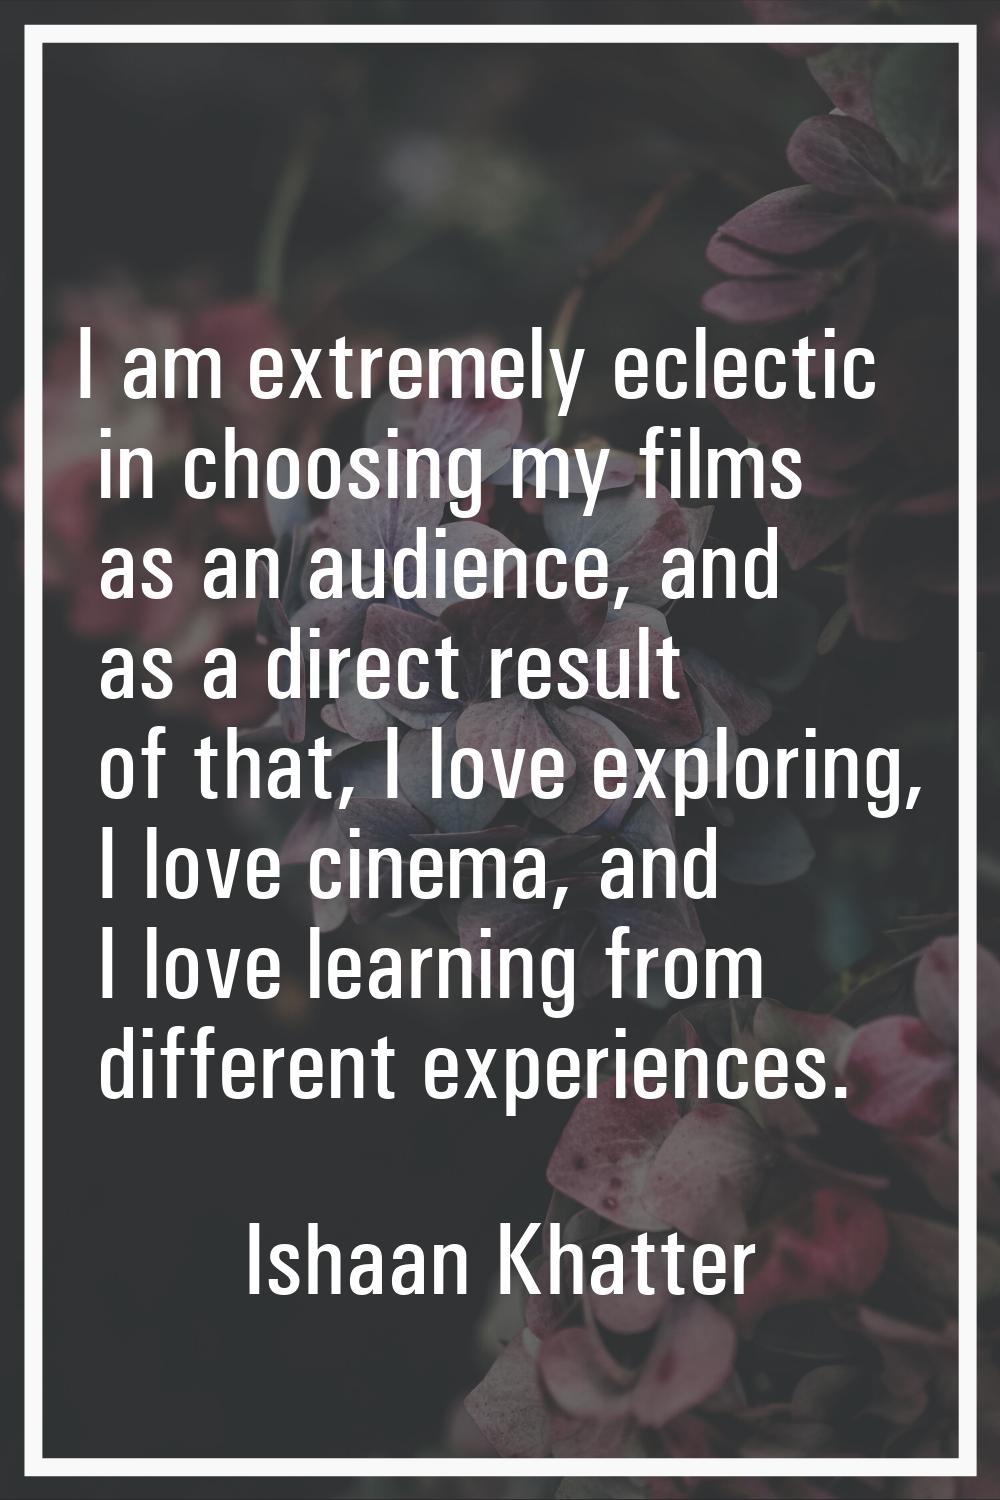 I am extremely eclectic in choosing my films as an audience, and as a direct result of that, I love